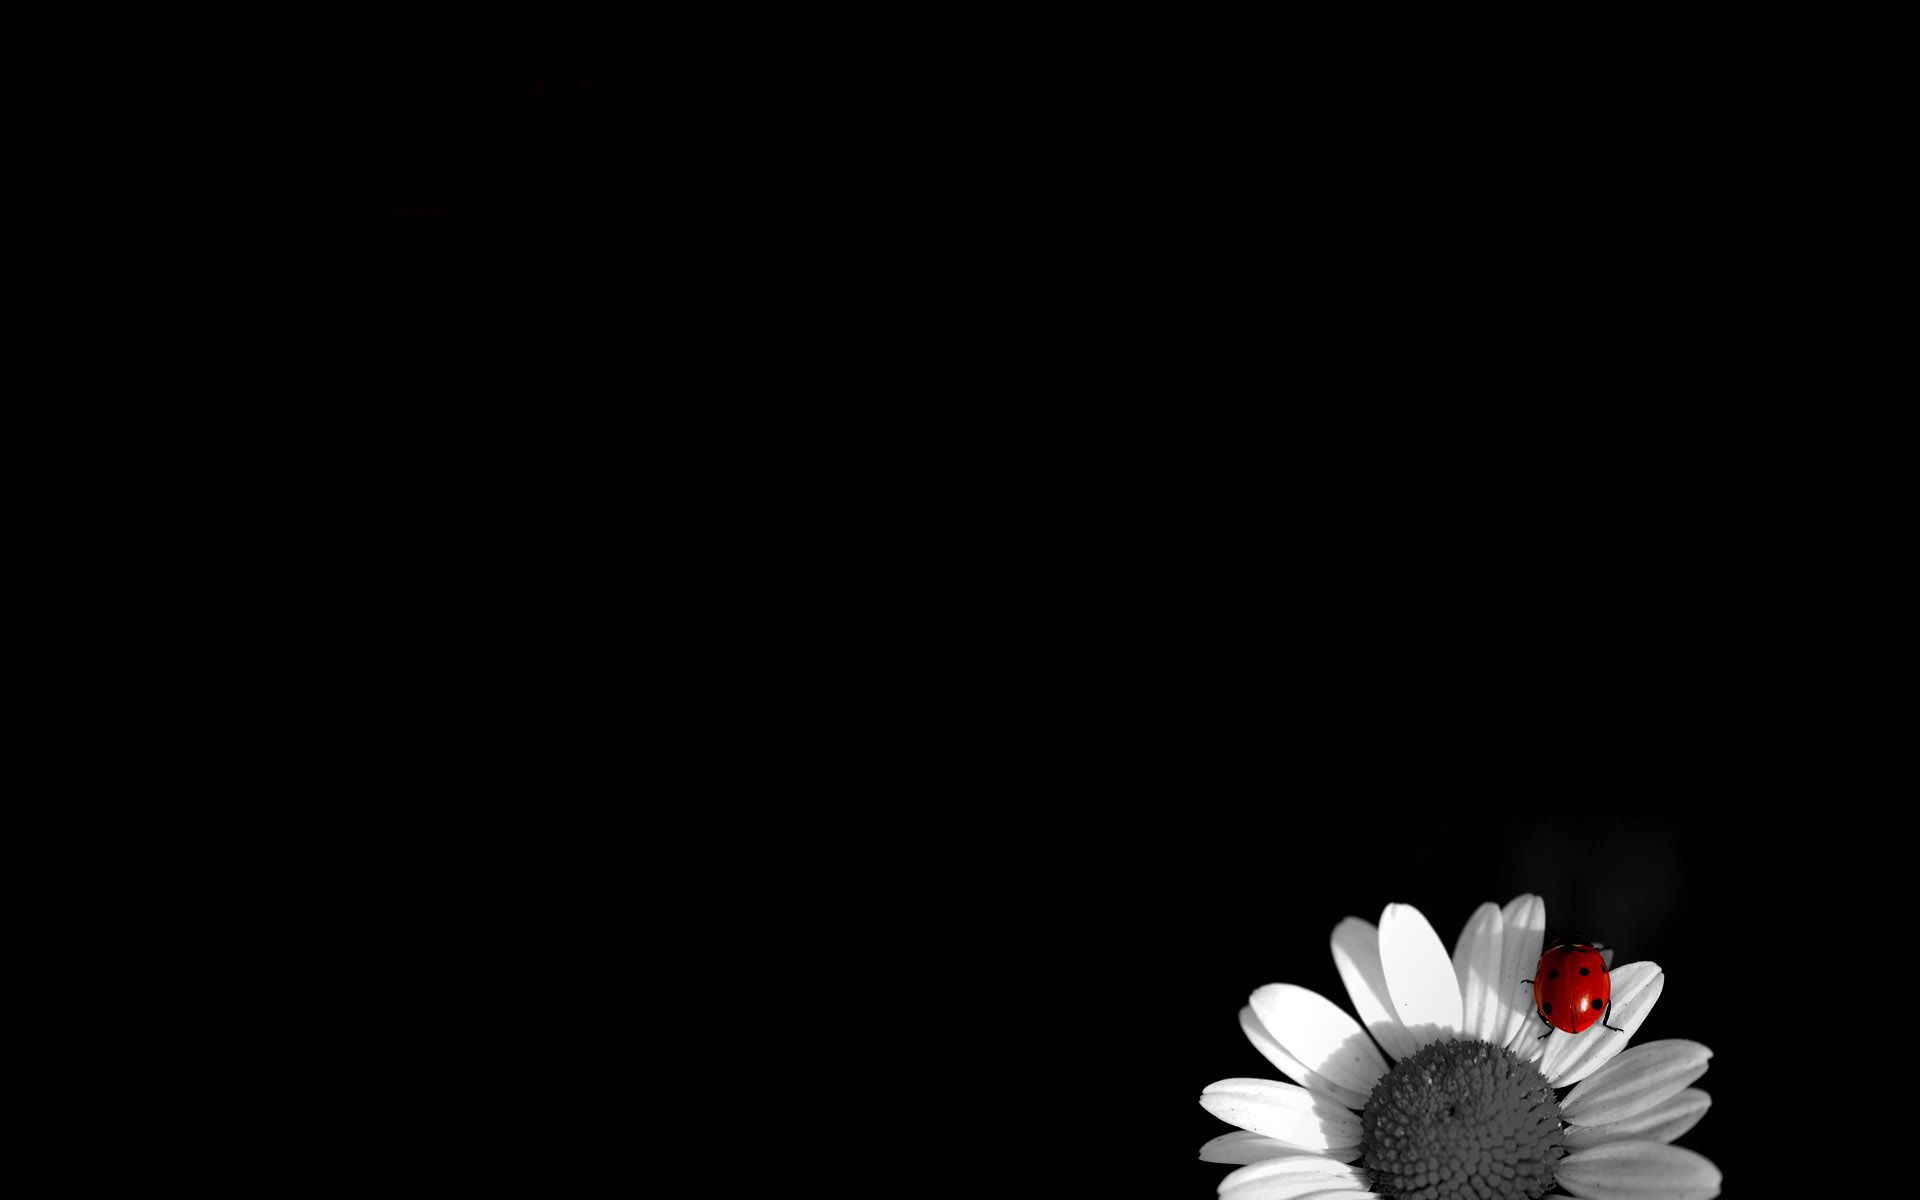 Black And White, flowers wallpaper. Black And White, flowers